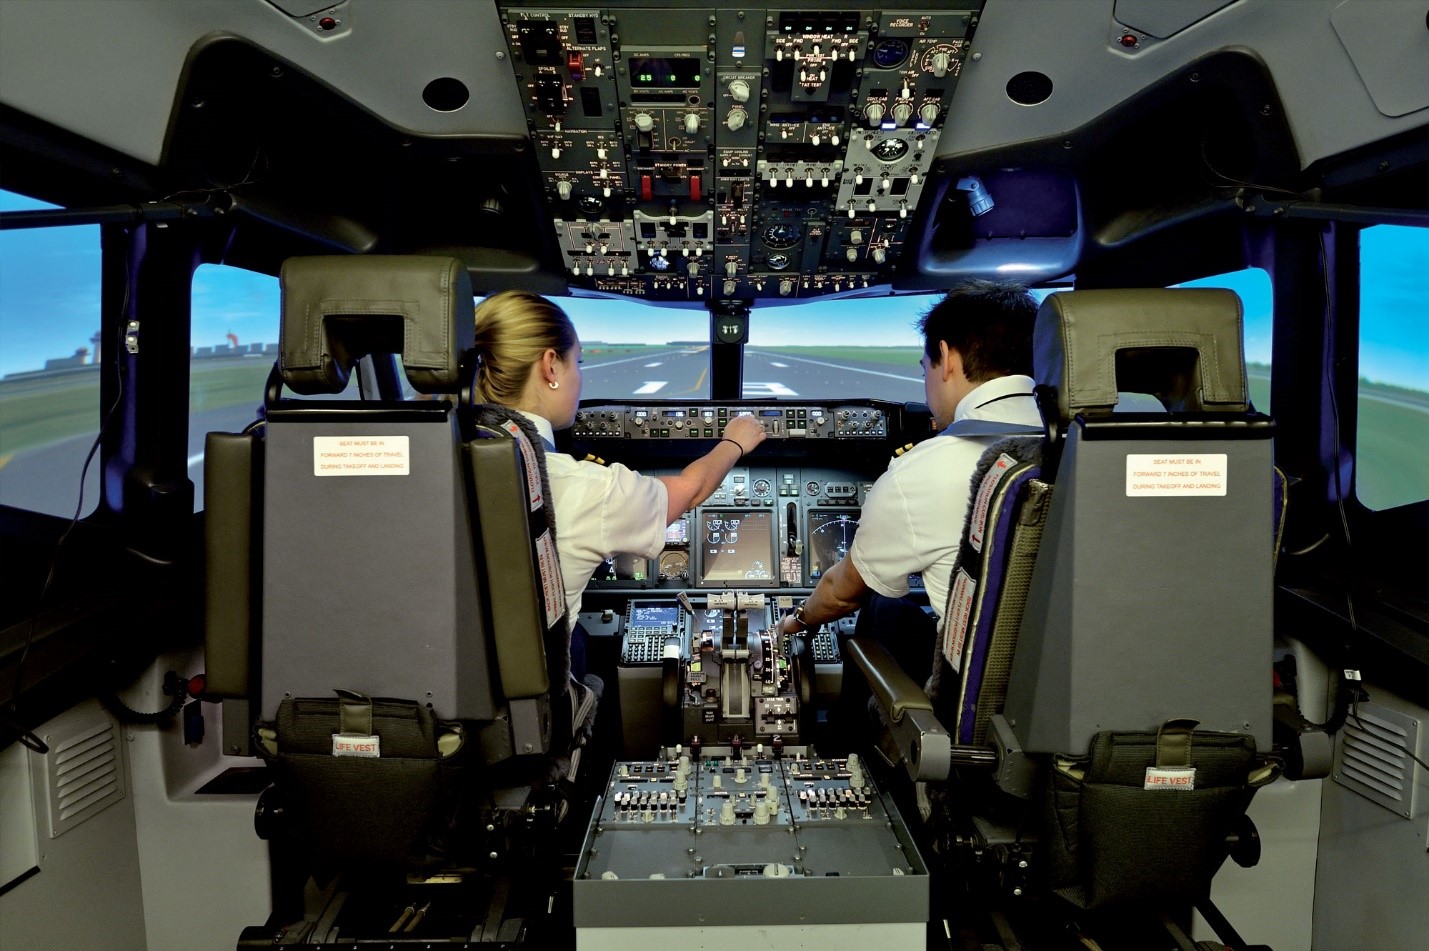 MPS uses the shell, seats, tactile interfaces and more, creating aircraft-specific flight decks, and therefore going way above and beyond this qualification level requirement